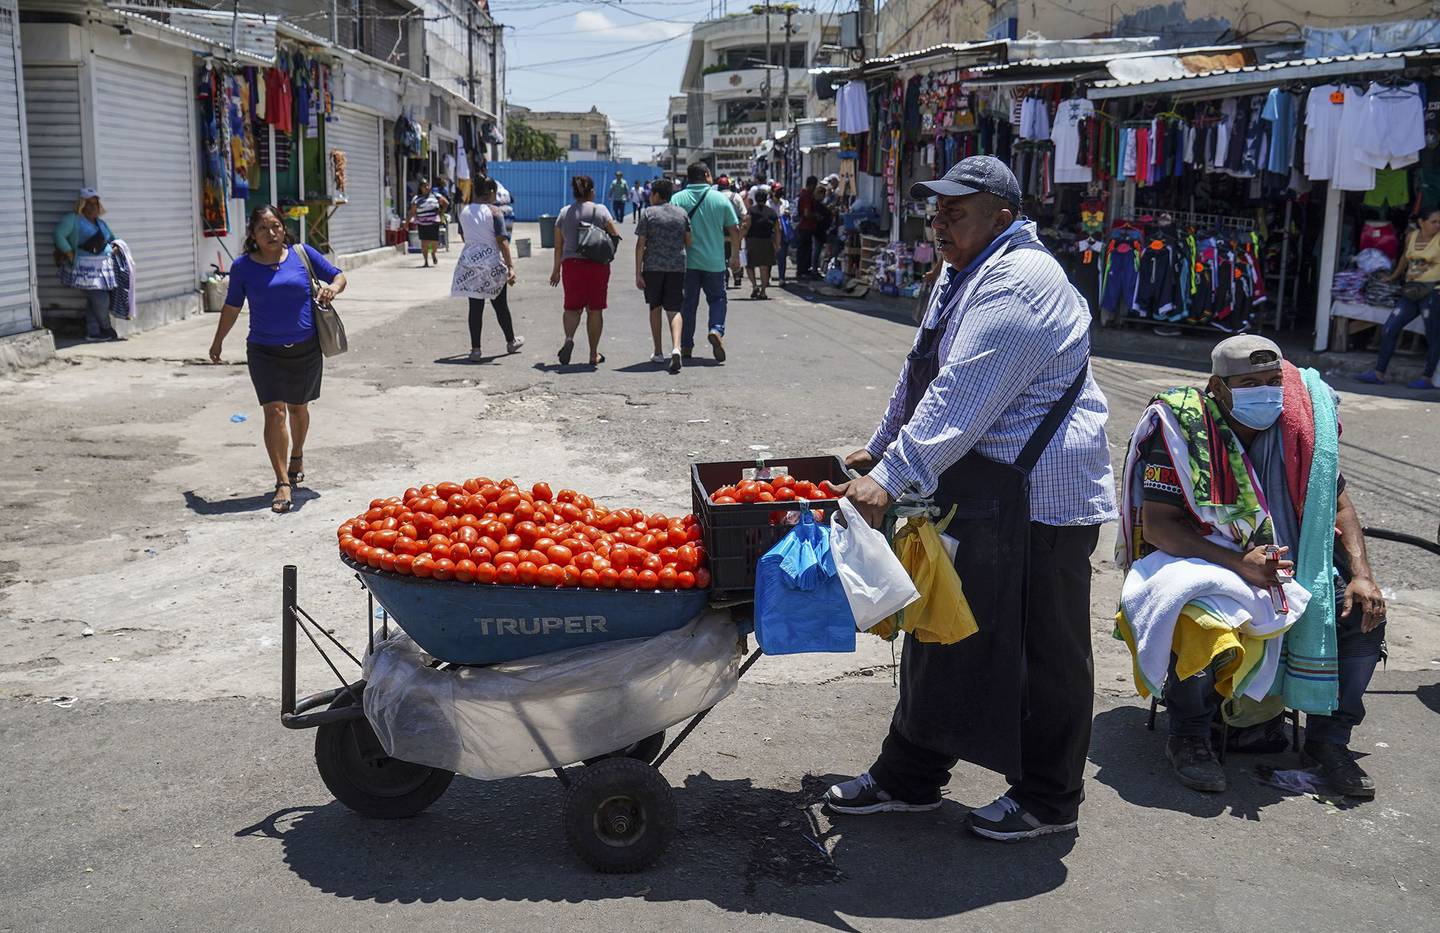 Street vendors at a local market in San Salvador, El Salvador. The nation has faced repeated slashing of its credit rating. Photographer: Armando Constanza/Getty Images